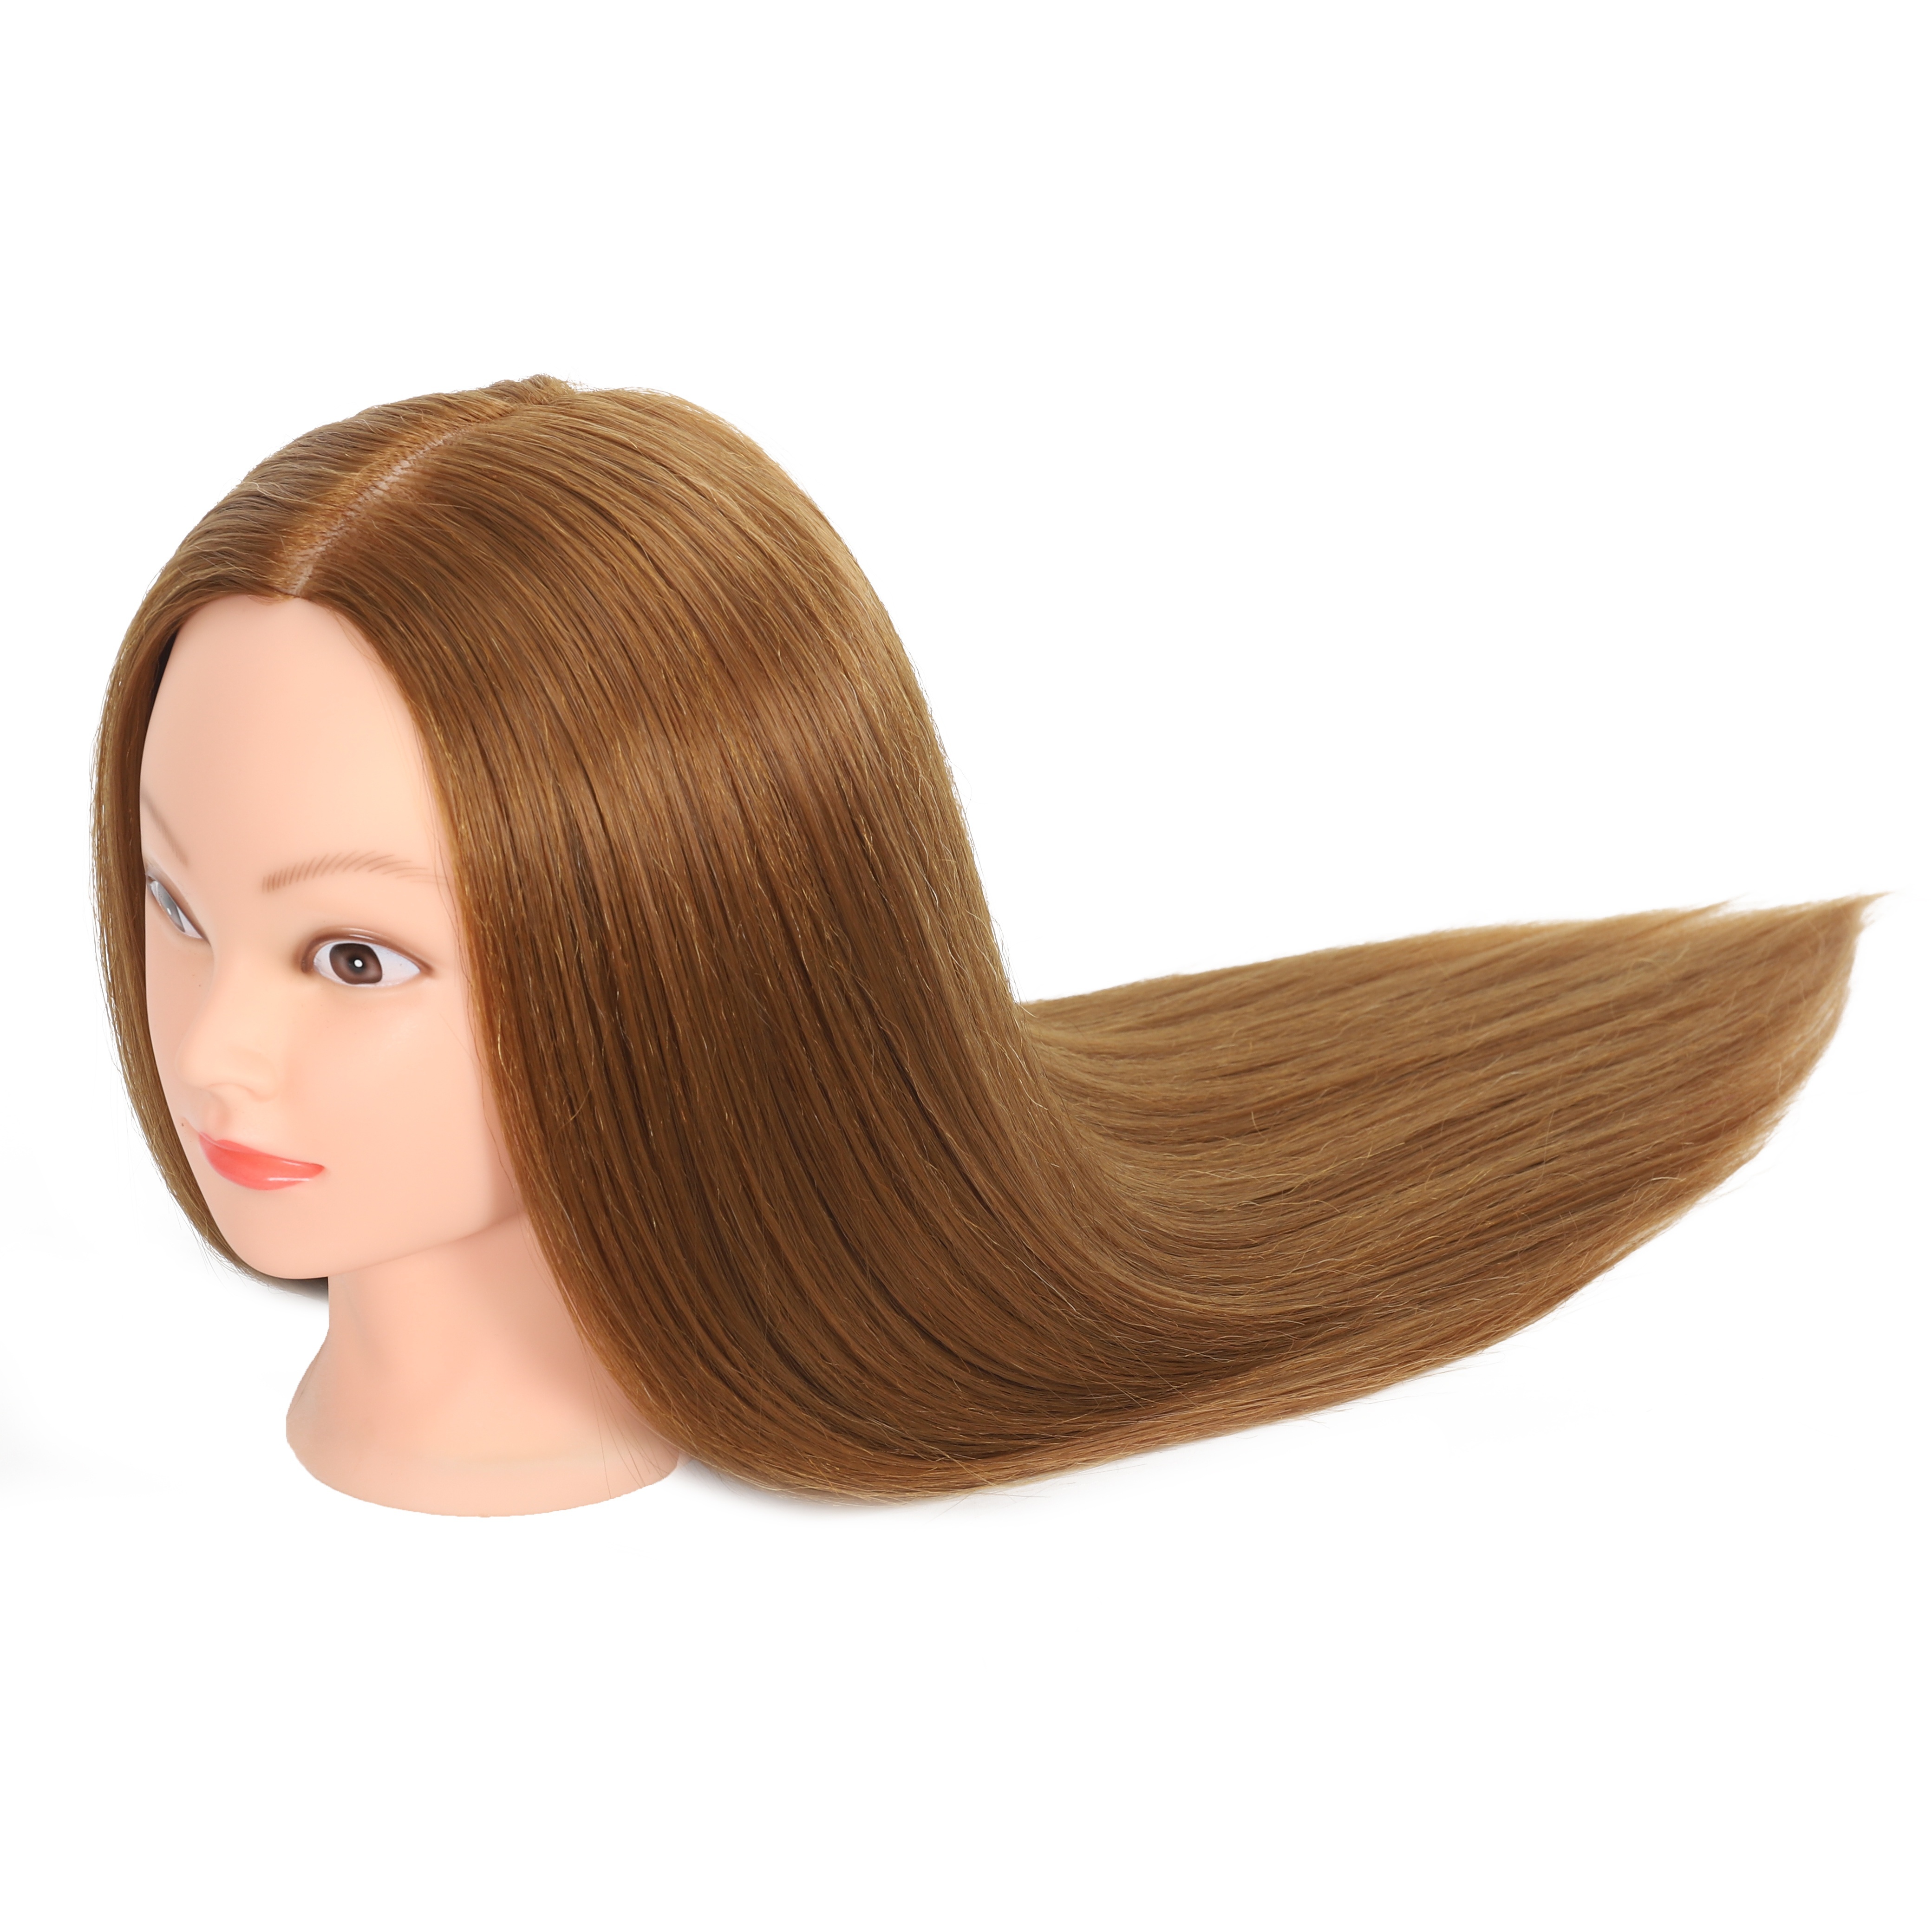 HAIREALM Wig Head for Making Wigs Mannequin Head India